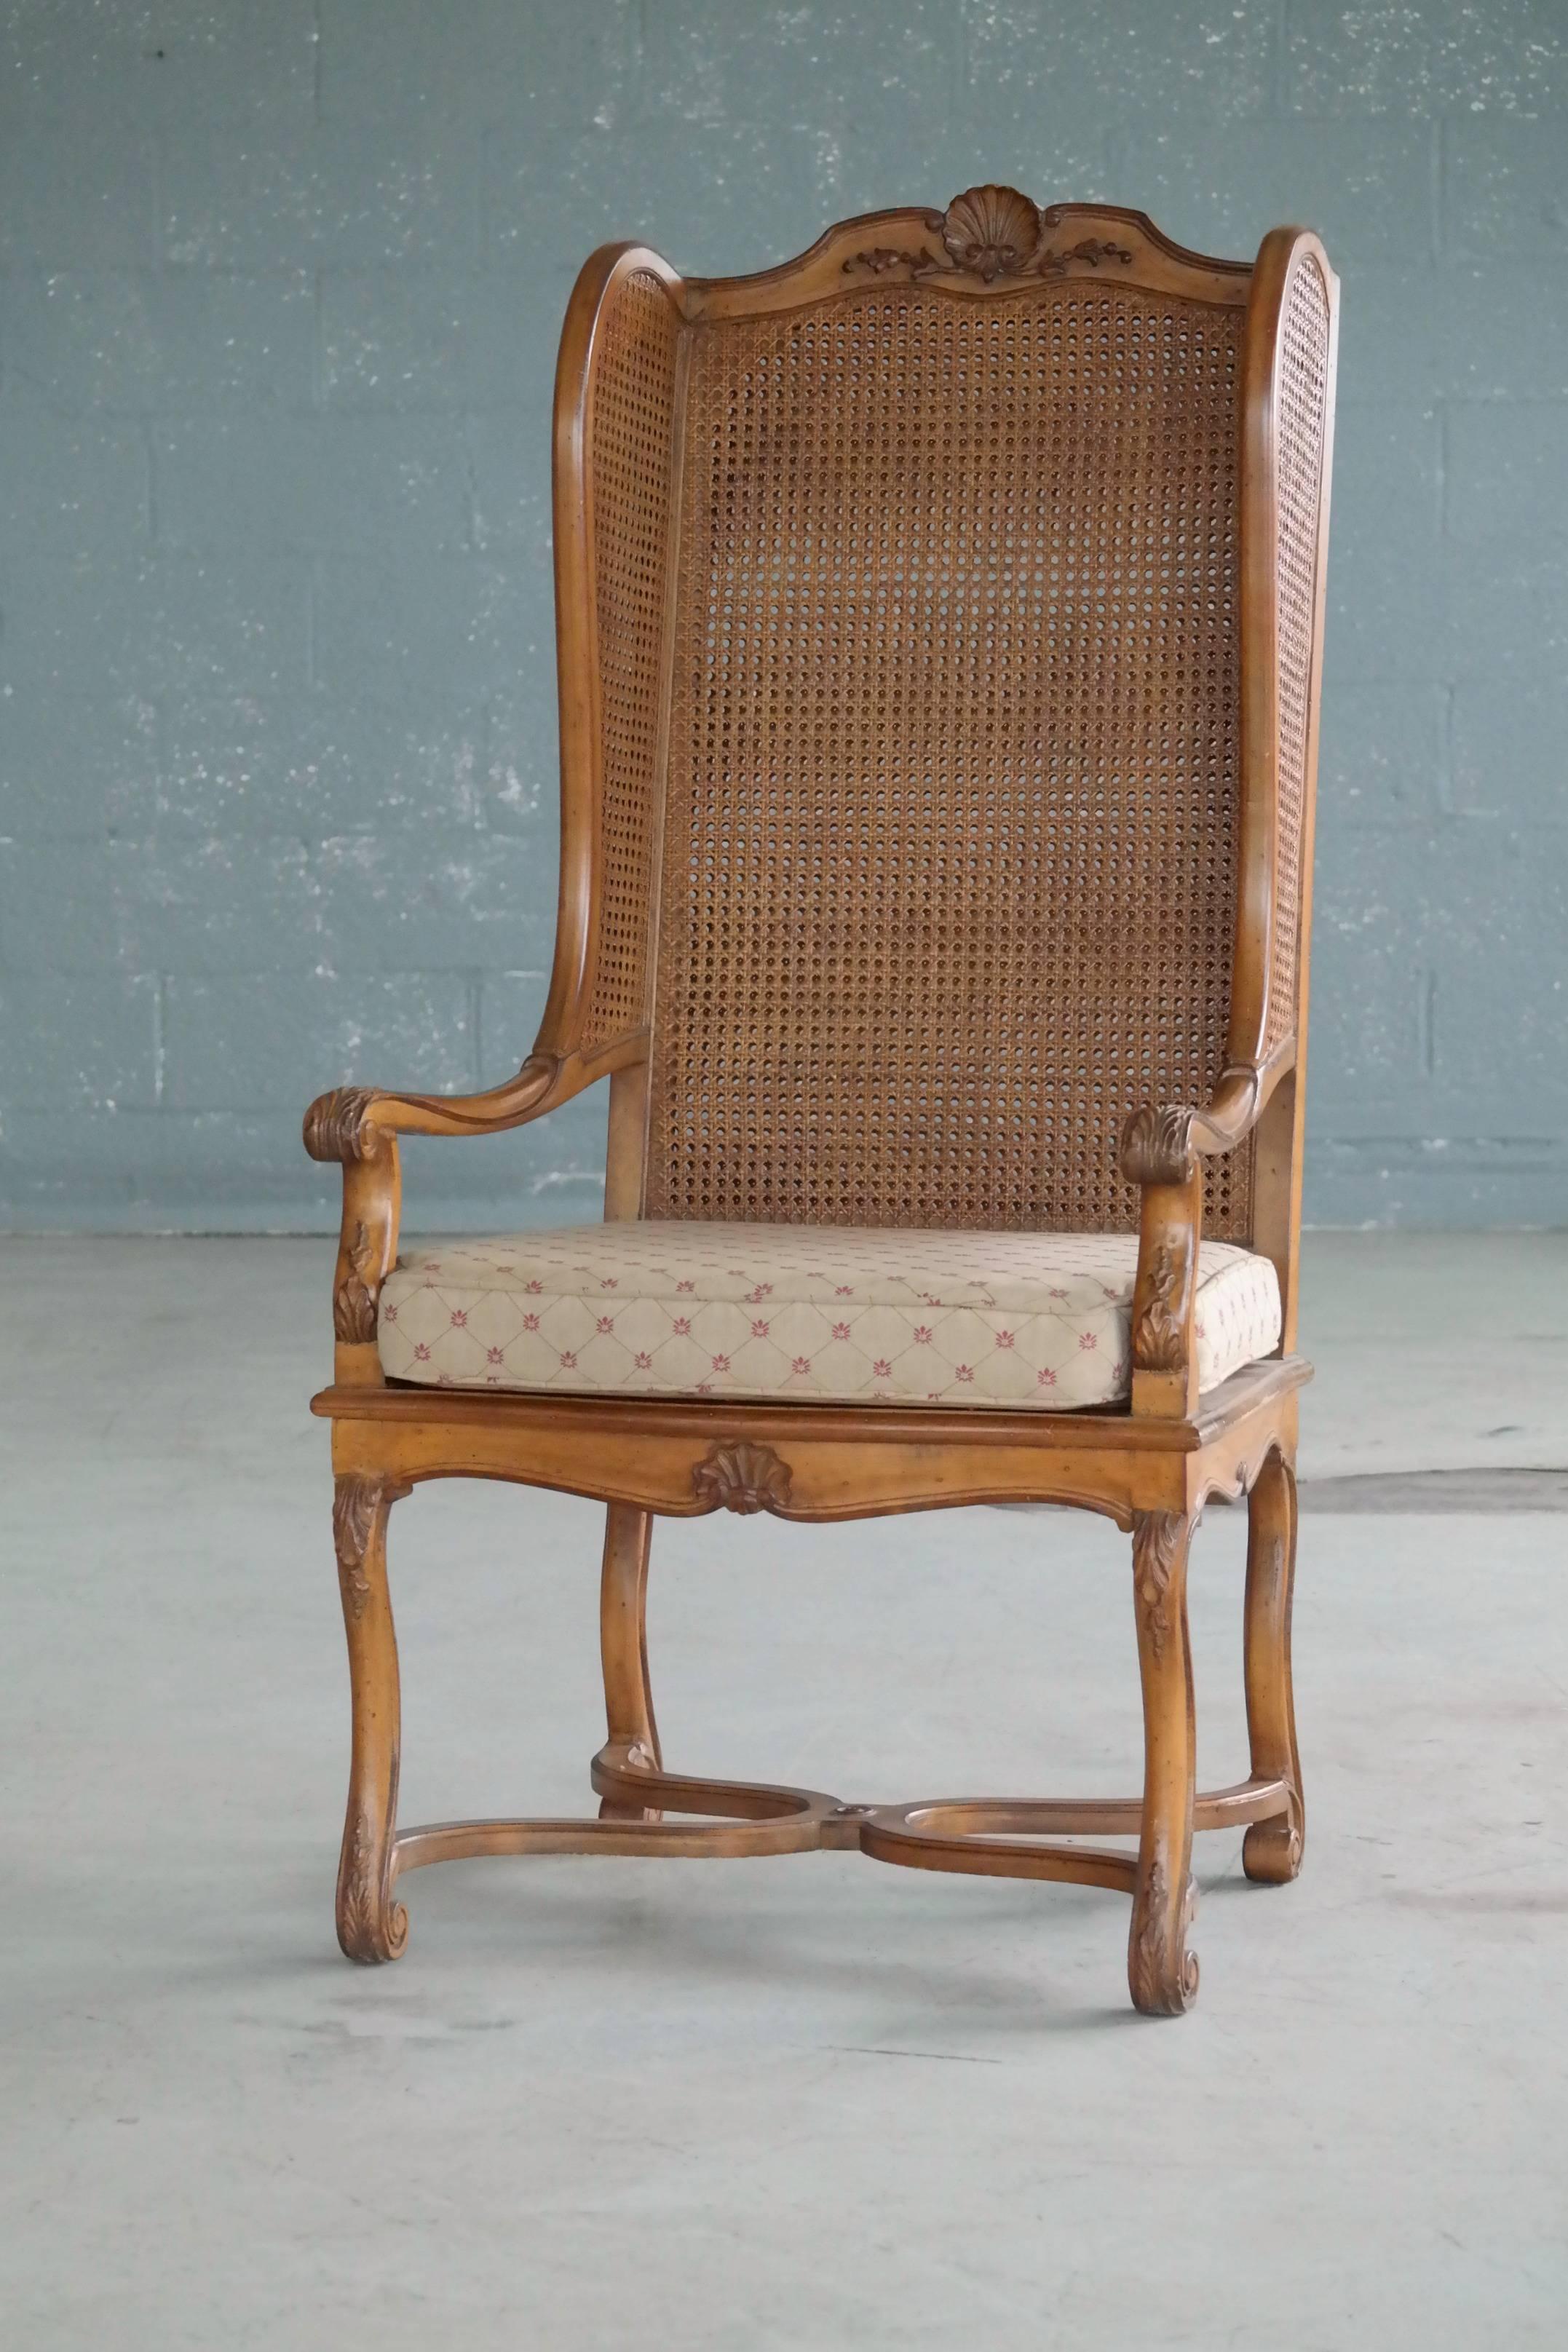 Super stylish 1920s American Hollywood Regency tall wingback chair in rare double cane. The chair shows appropriate age wear in the form of minor nicks and scuffs while the cane is in very near perfect condition. The chairs were part of the set